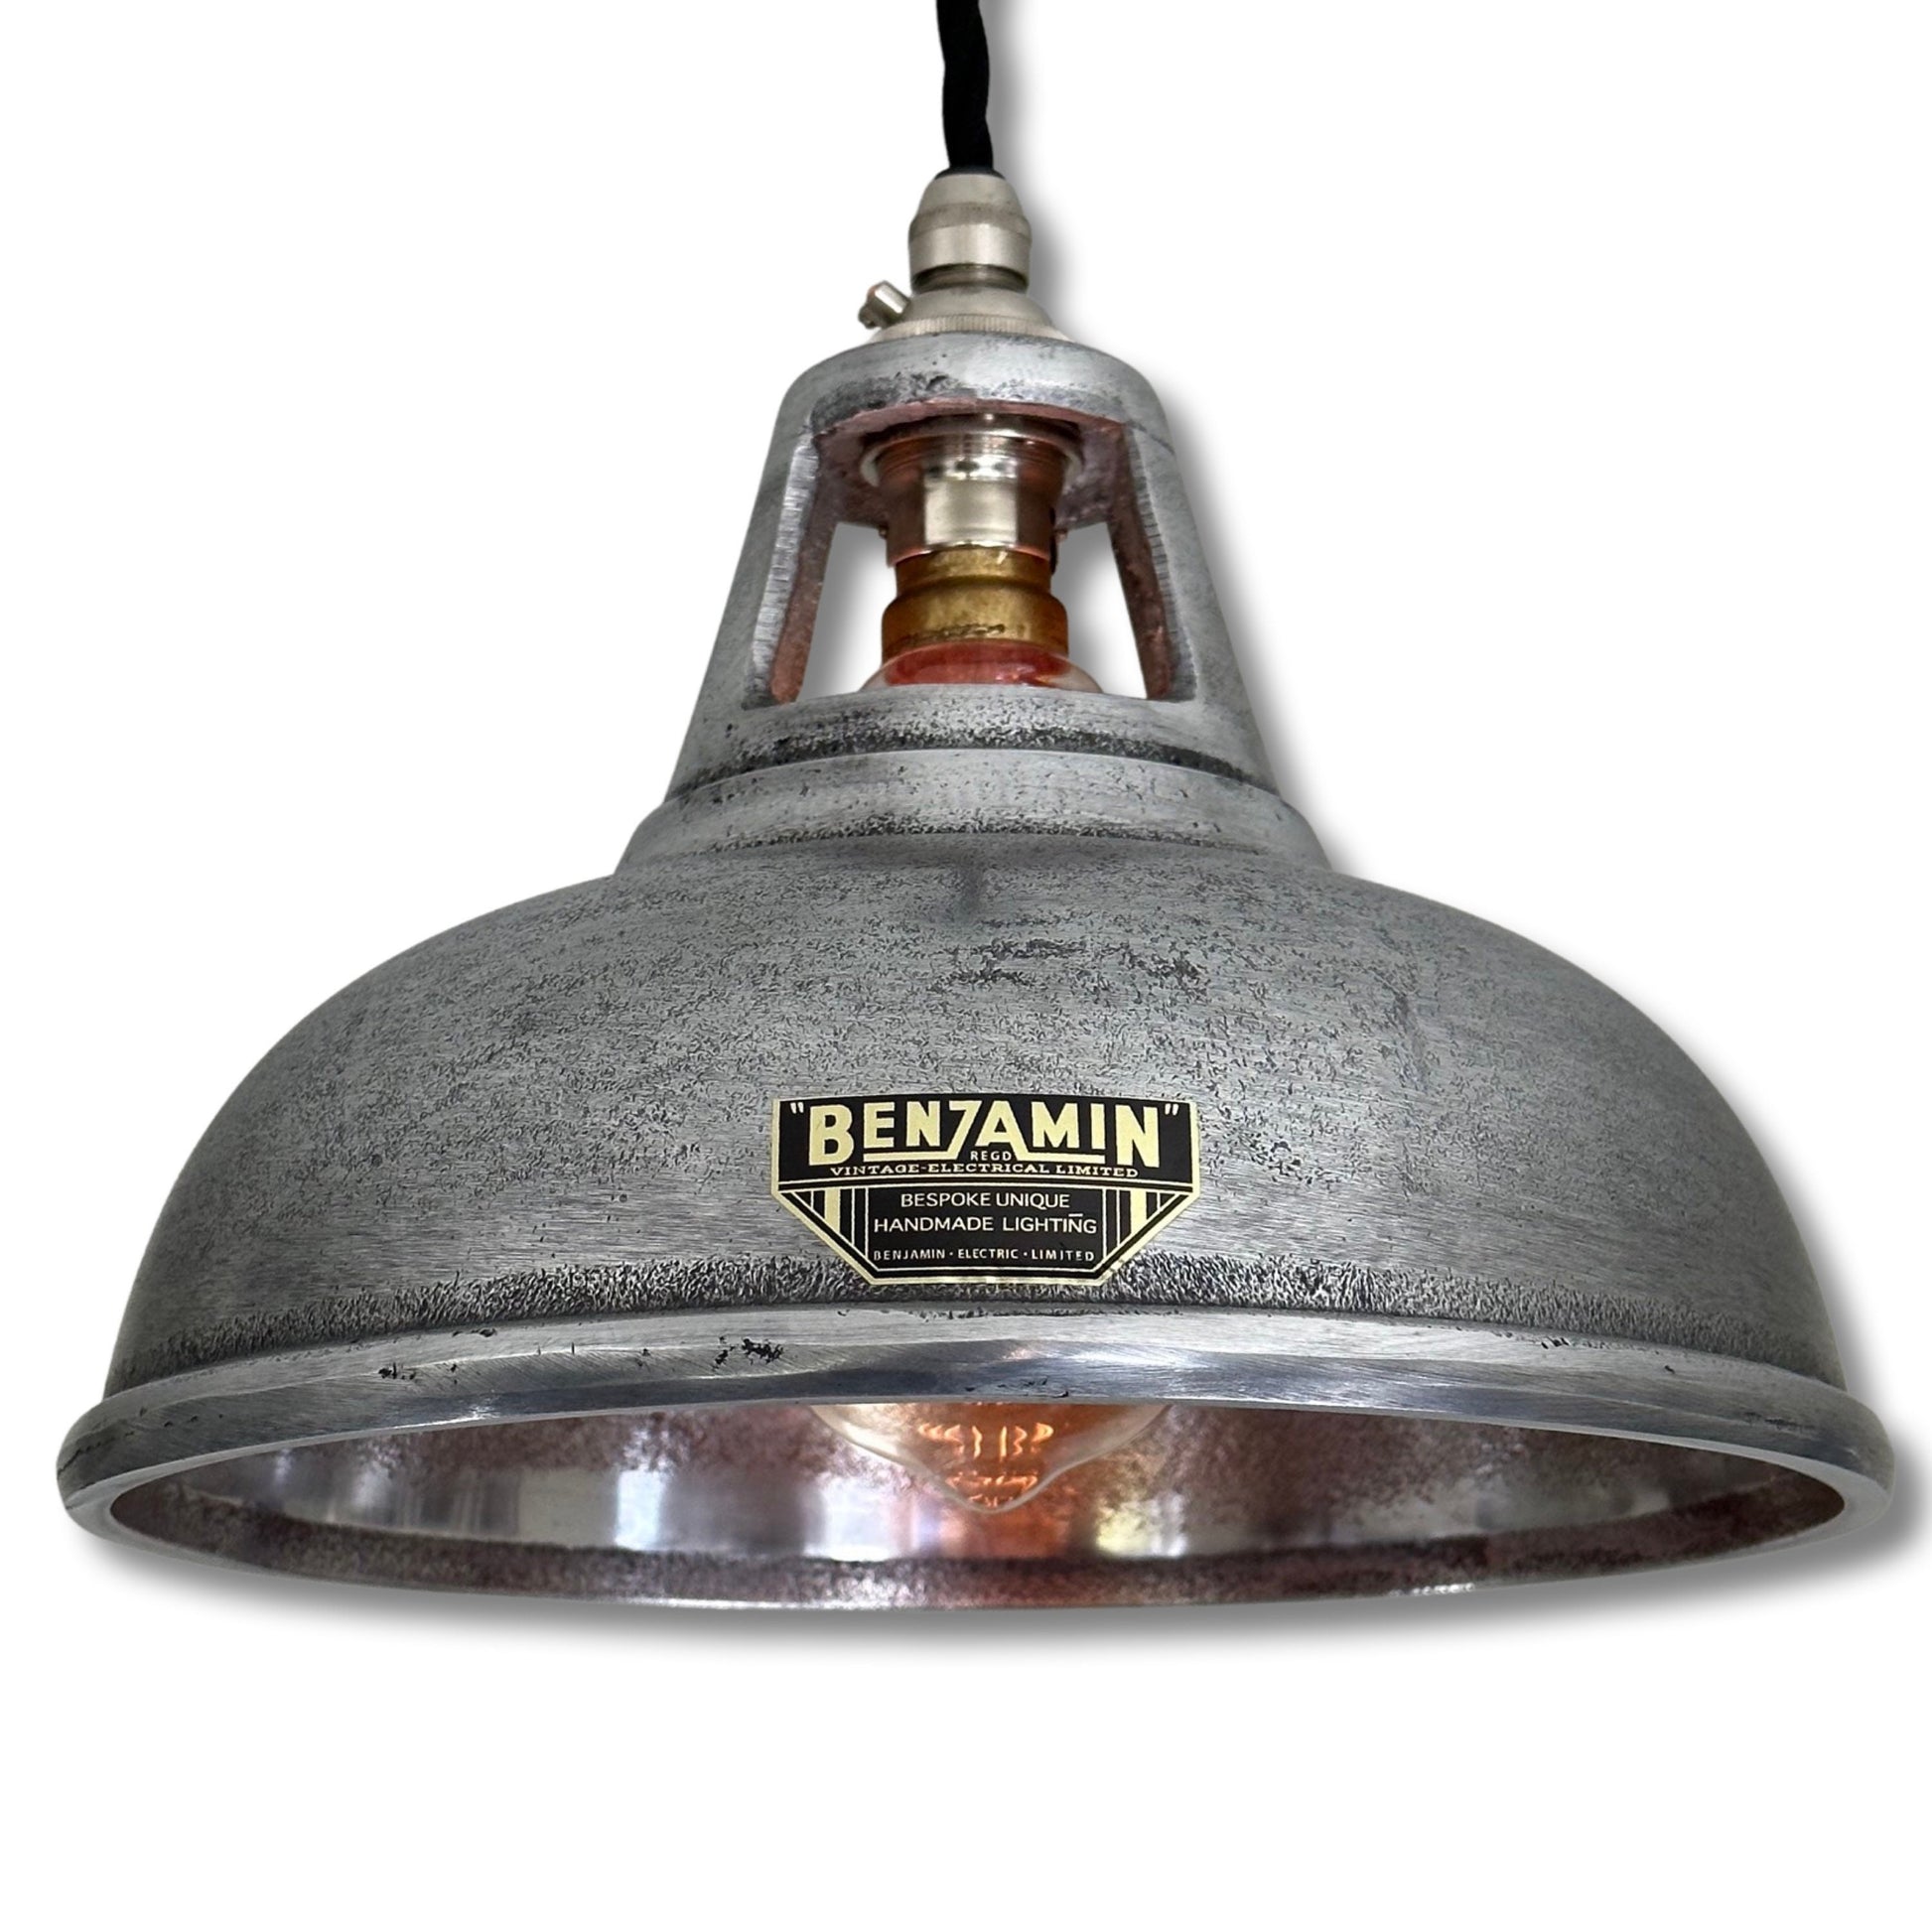 Cawston Small ~ Cast Solid Shade 1932 Design Pendant Set Light | Ceiling Dining Room | Kitchen Table | Vintage Industrial Pewter | 9 Inch